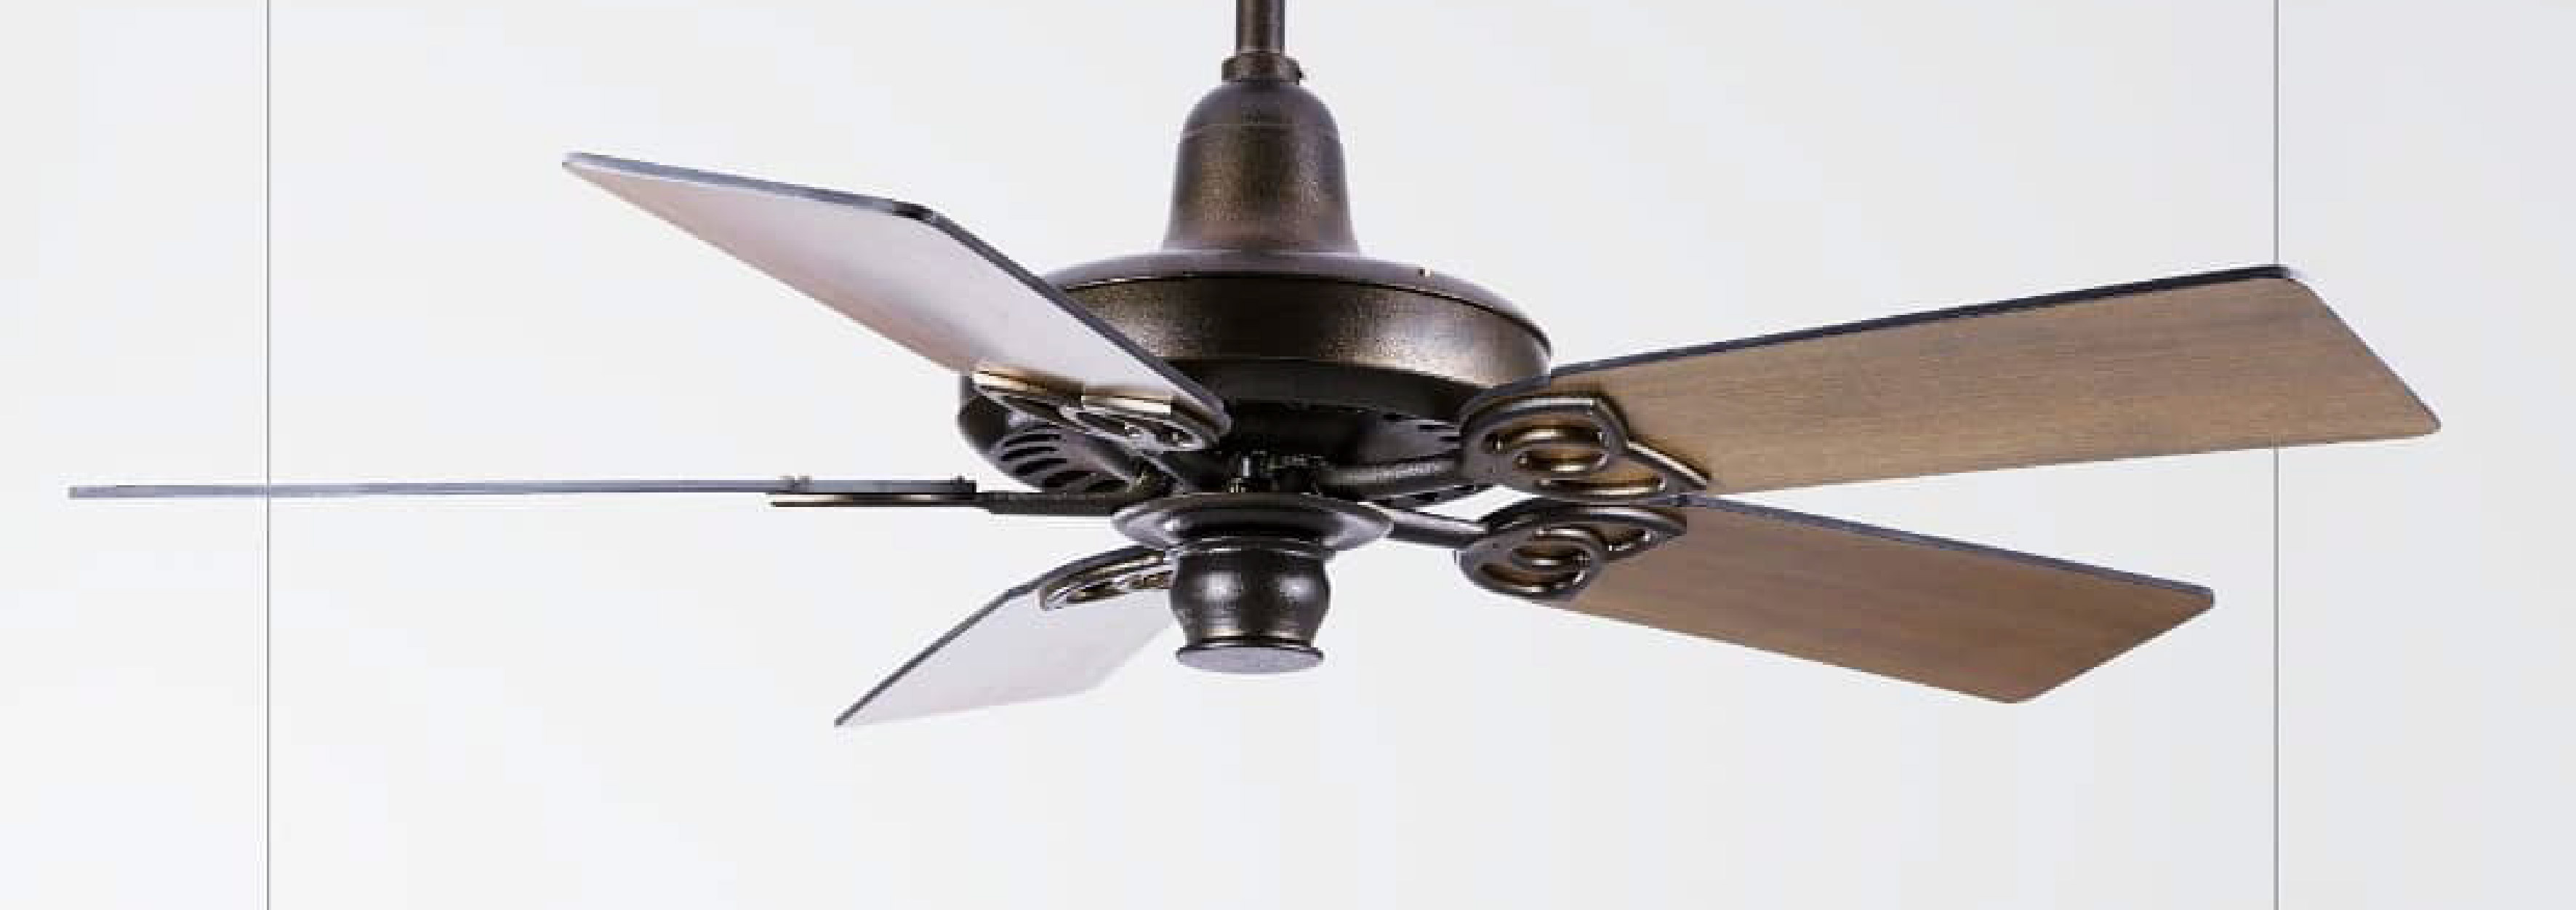 Luxury Designer Ceiling Fans For Every Room